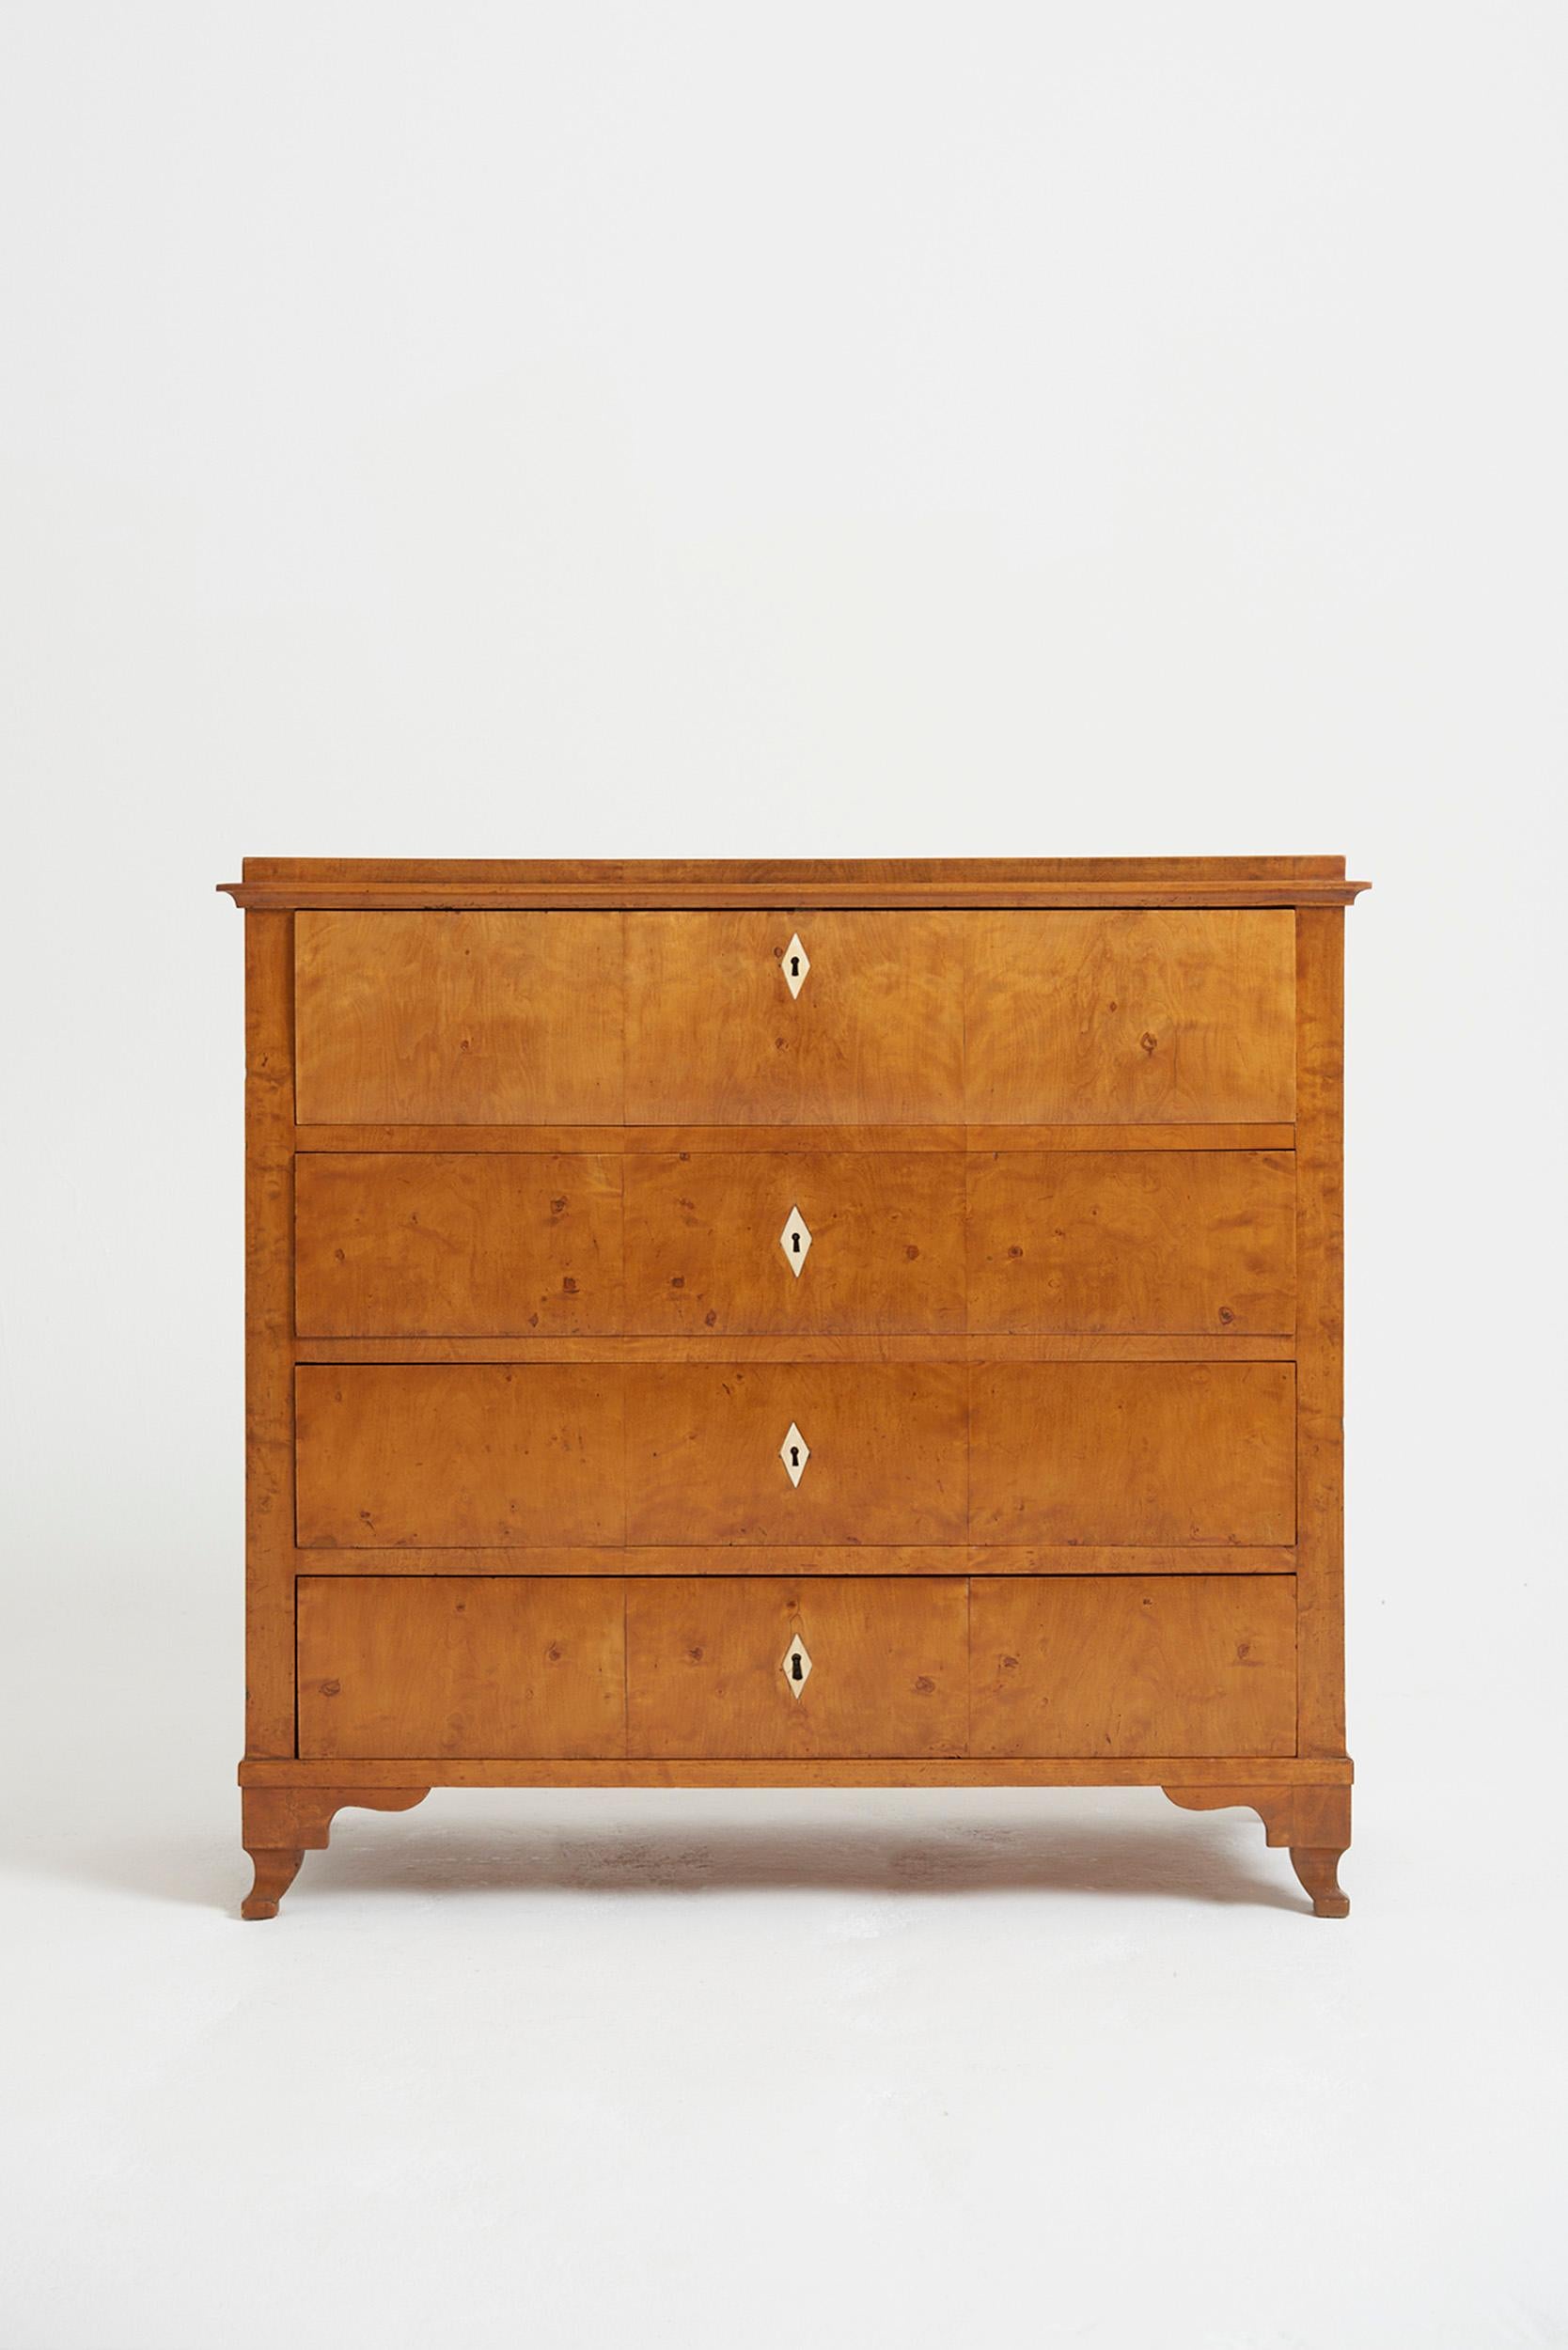 A satin birch chest of drawers, with bone key holes and knobs, the top drawer revealing a fitted secretaire. 
Sweden, Circa 1830-50